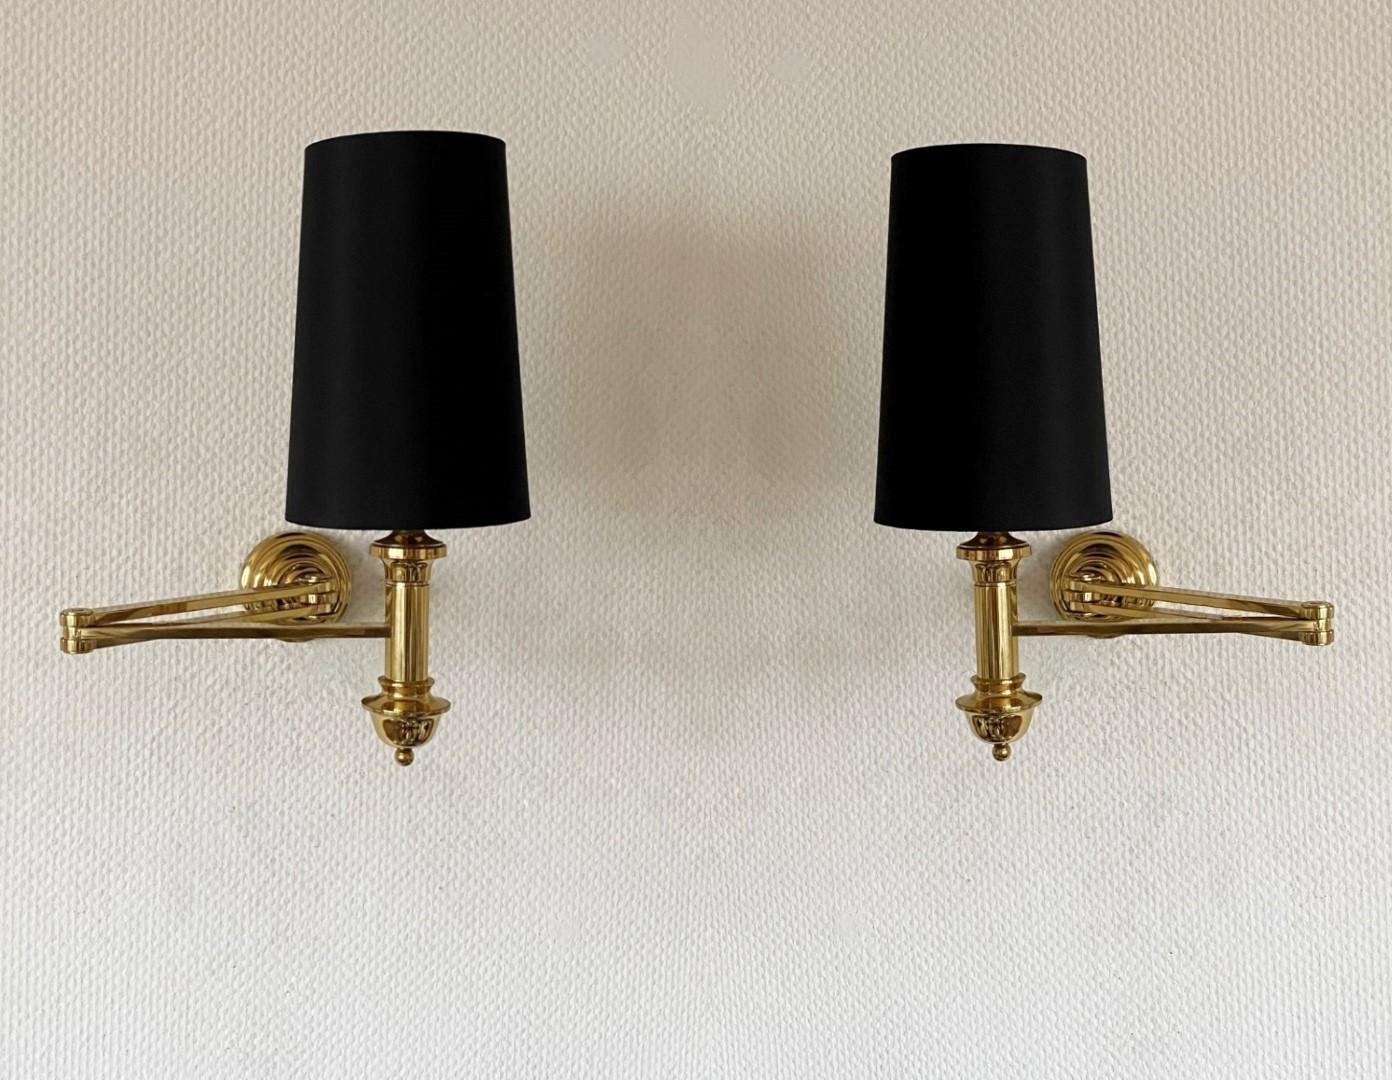 Pair of Maison Jansen Style Brass Swing Arm Wall Sconces Lights, 1960s In Good Condition For Sale In Frankfurt am Main, DE